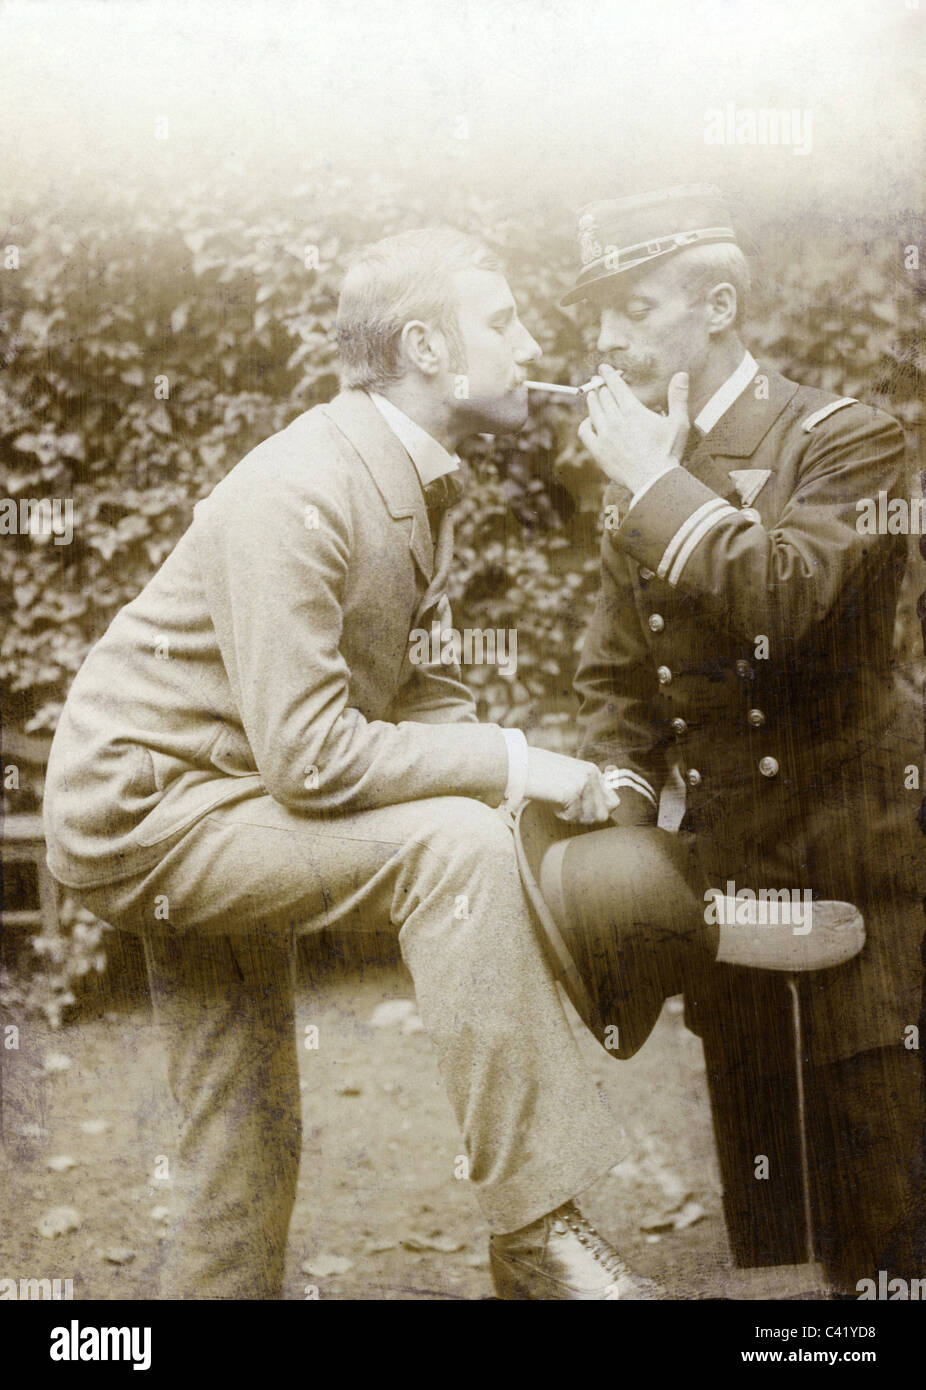 people, men, man getting a light for his cigarette from an official or military officer, Austria, circa 1910, Additional-Rights-Clearences-Not Available Stock Photo